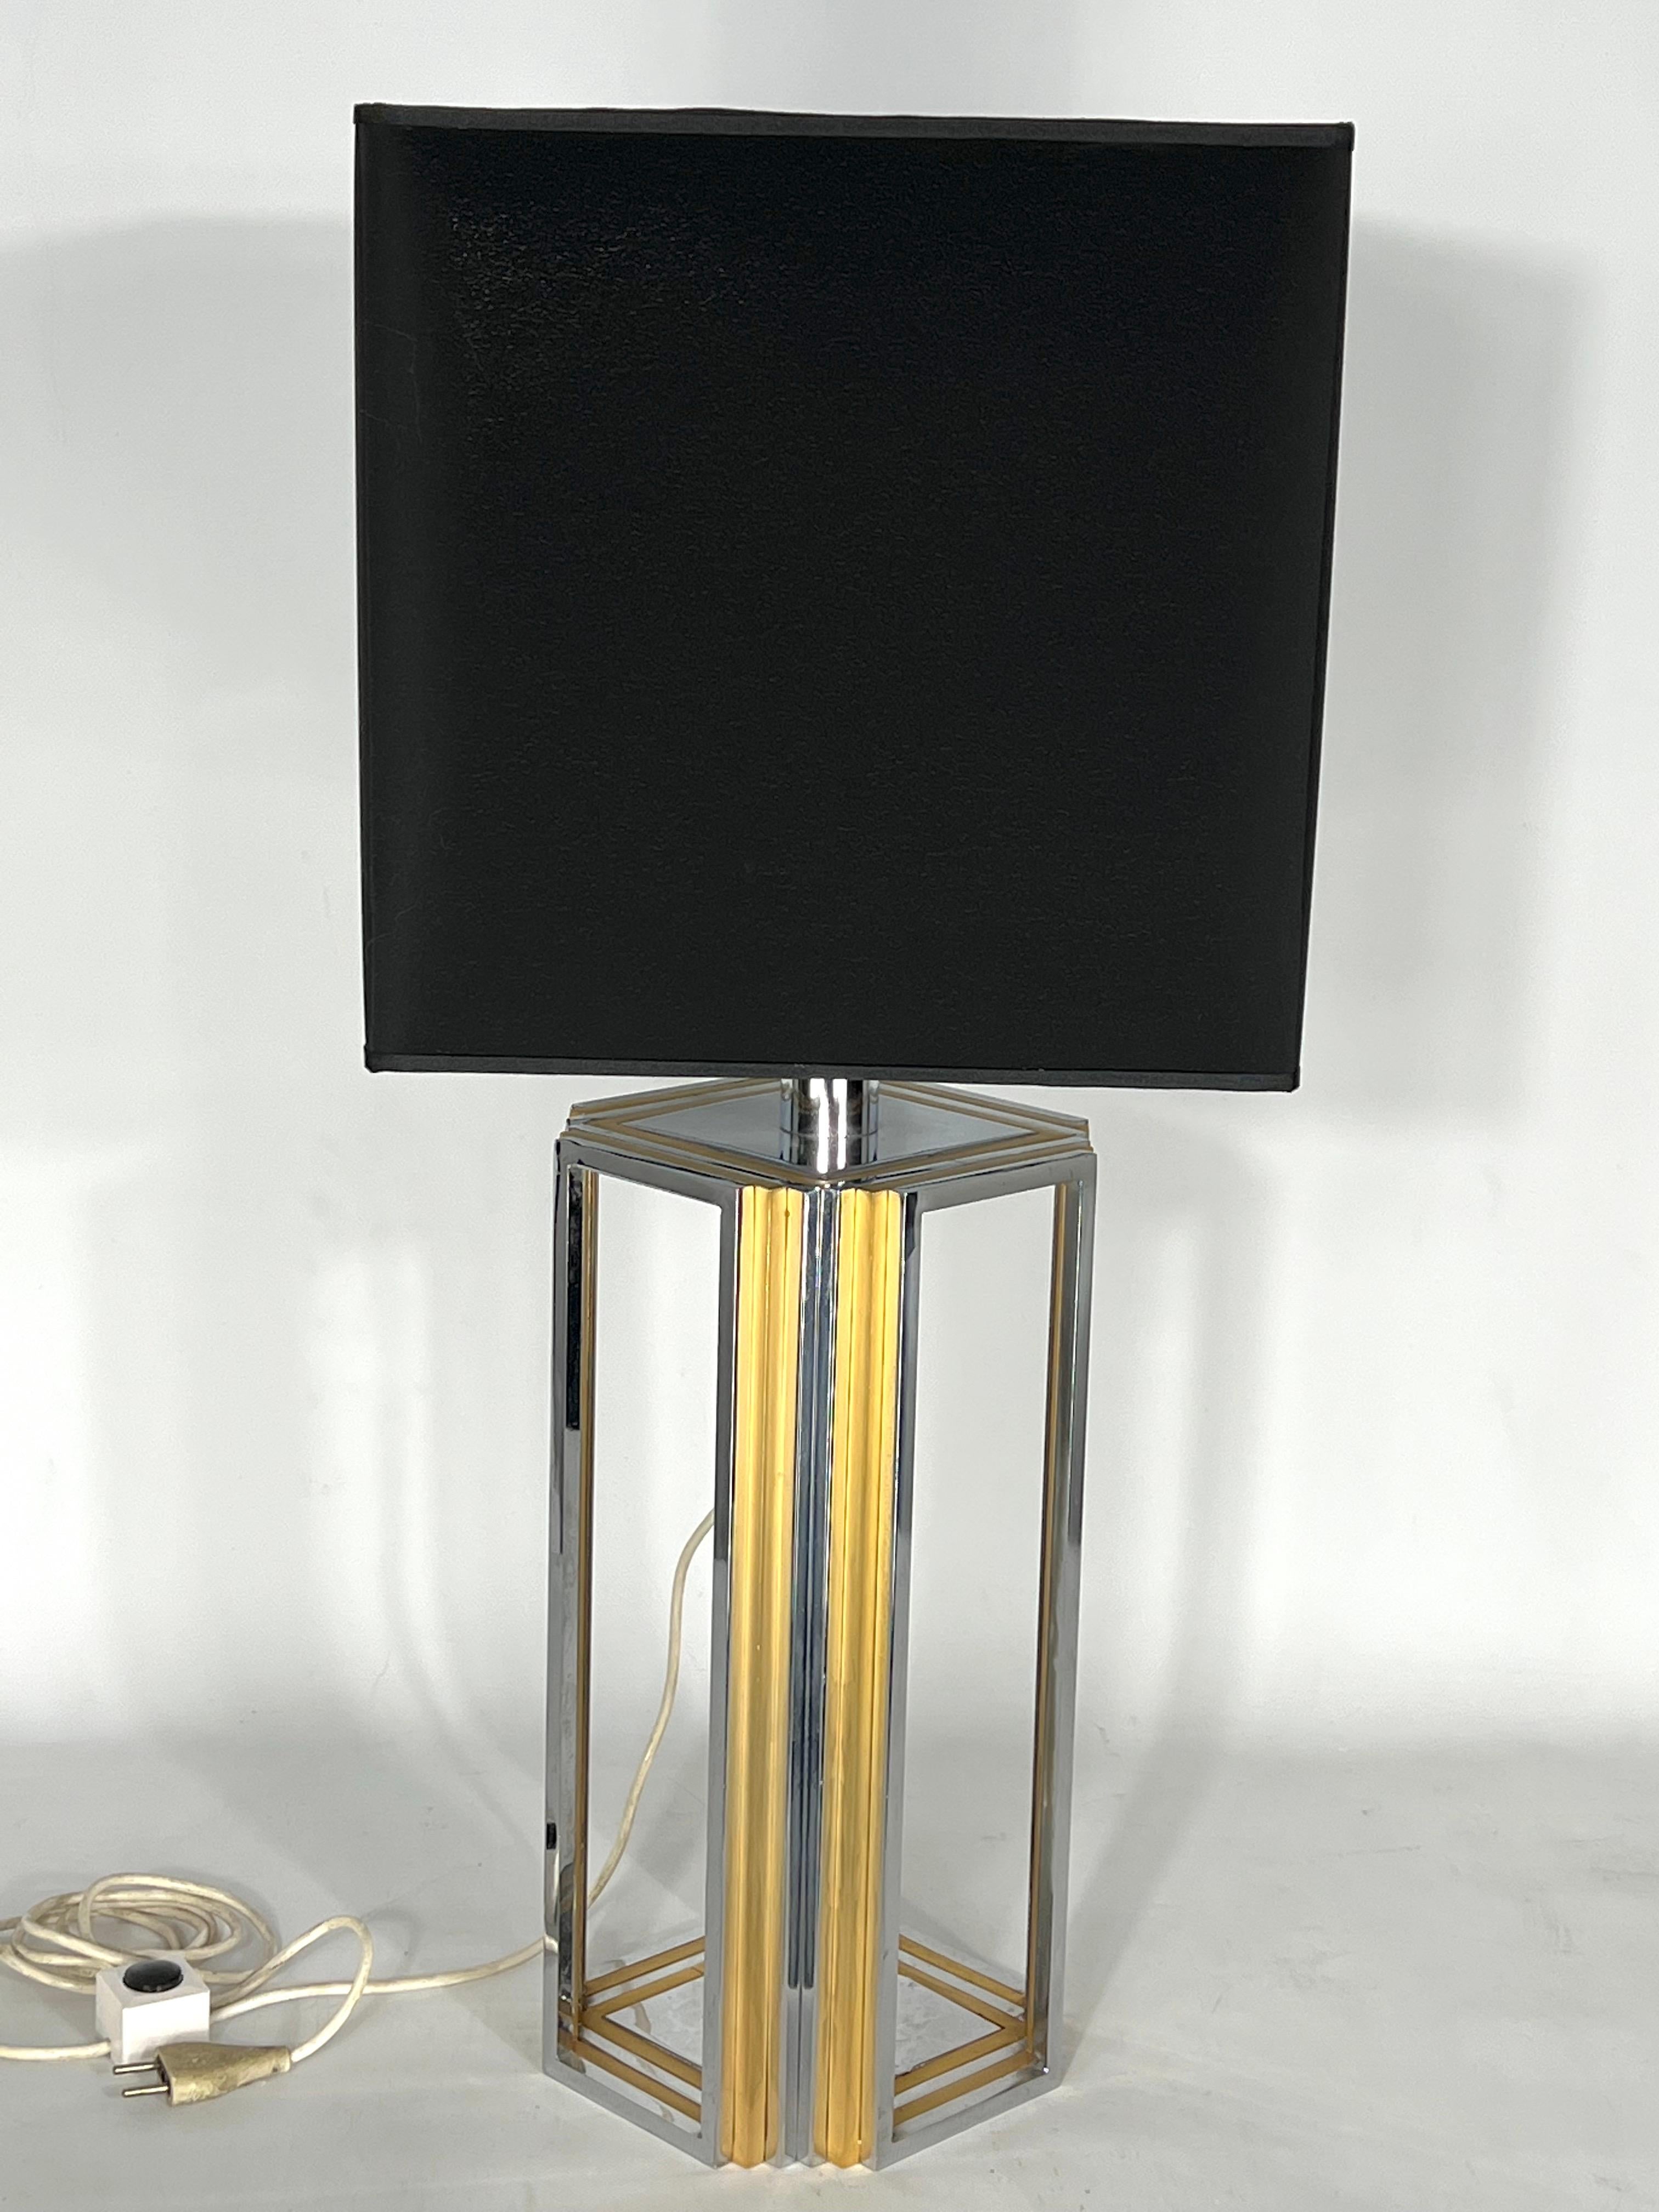 Great vintage condition with normal trace of age and use for this table lamp made from chrome and brass and attributed to Romeo Rega. No label or signature. It mounts a single socket for E27 lamp. Produced in Italy during the 70s. Dimensions with